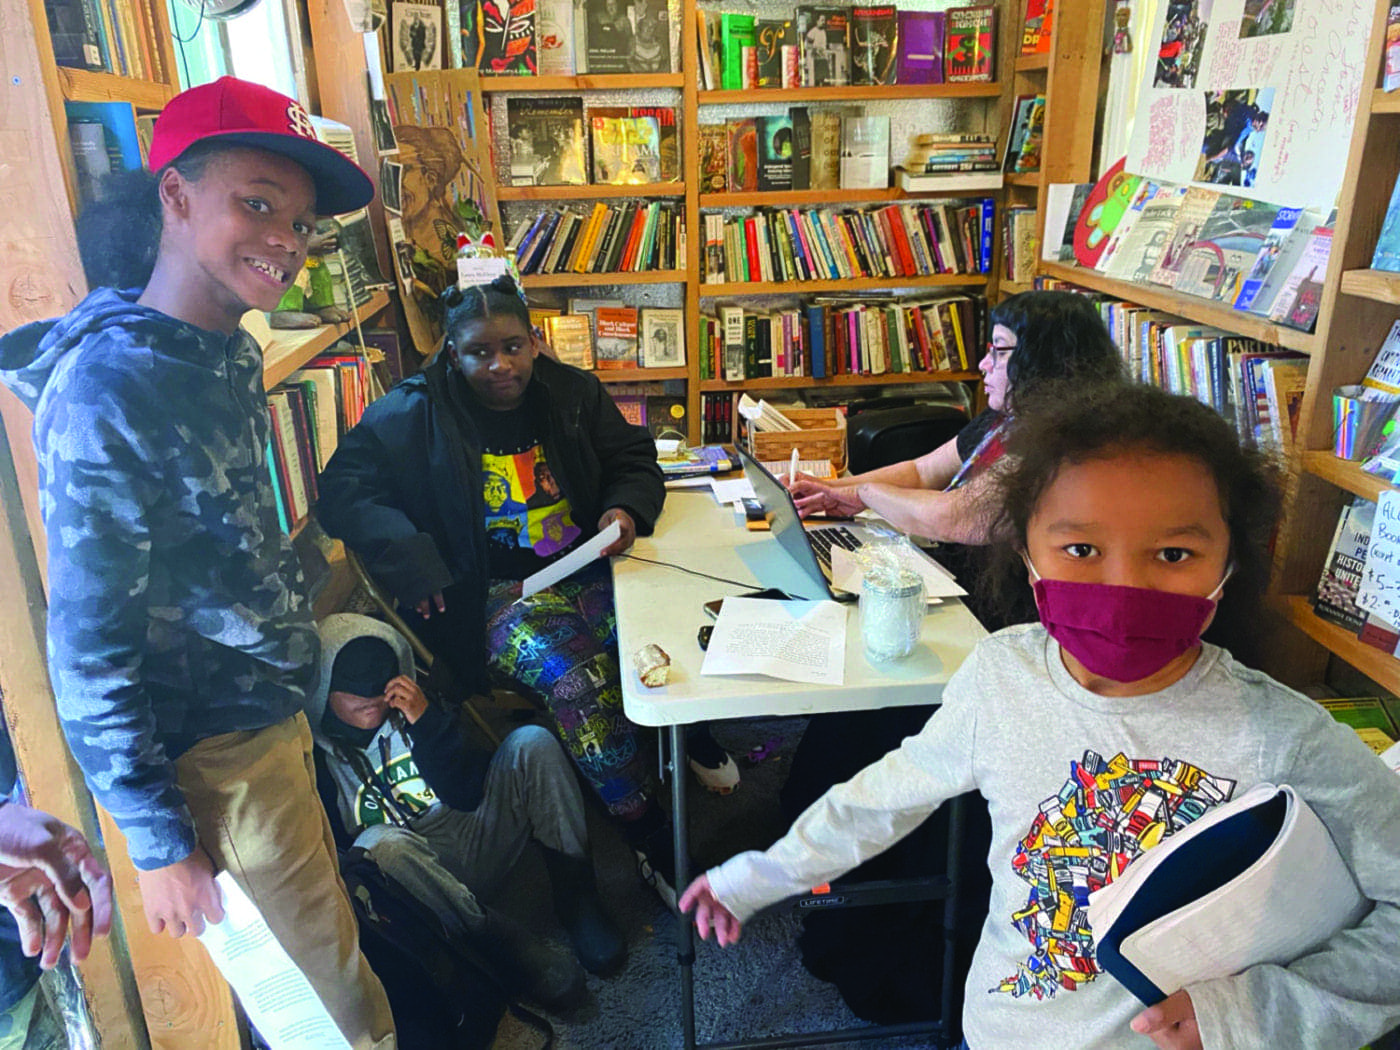 Ziair-Hughes-Amun-Ra-Nija-Aunti-teacher-Angel-Heart-and-Avery-POOR-Magazine-1400x1050, Reflecting on climate terrorism with the youth of DeeColonize Academy, Culture Currents Local News & Views News & Views 